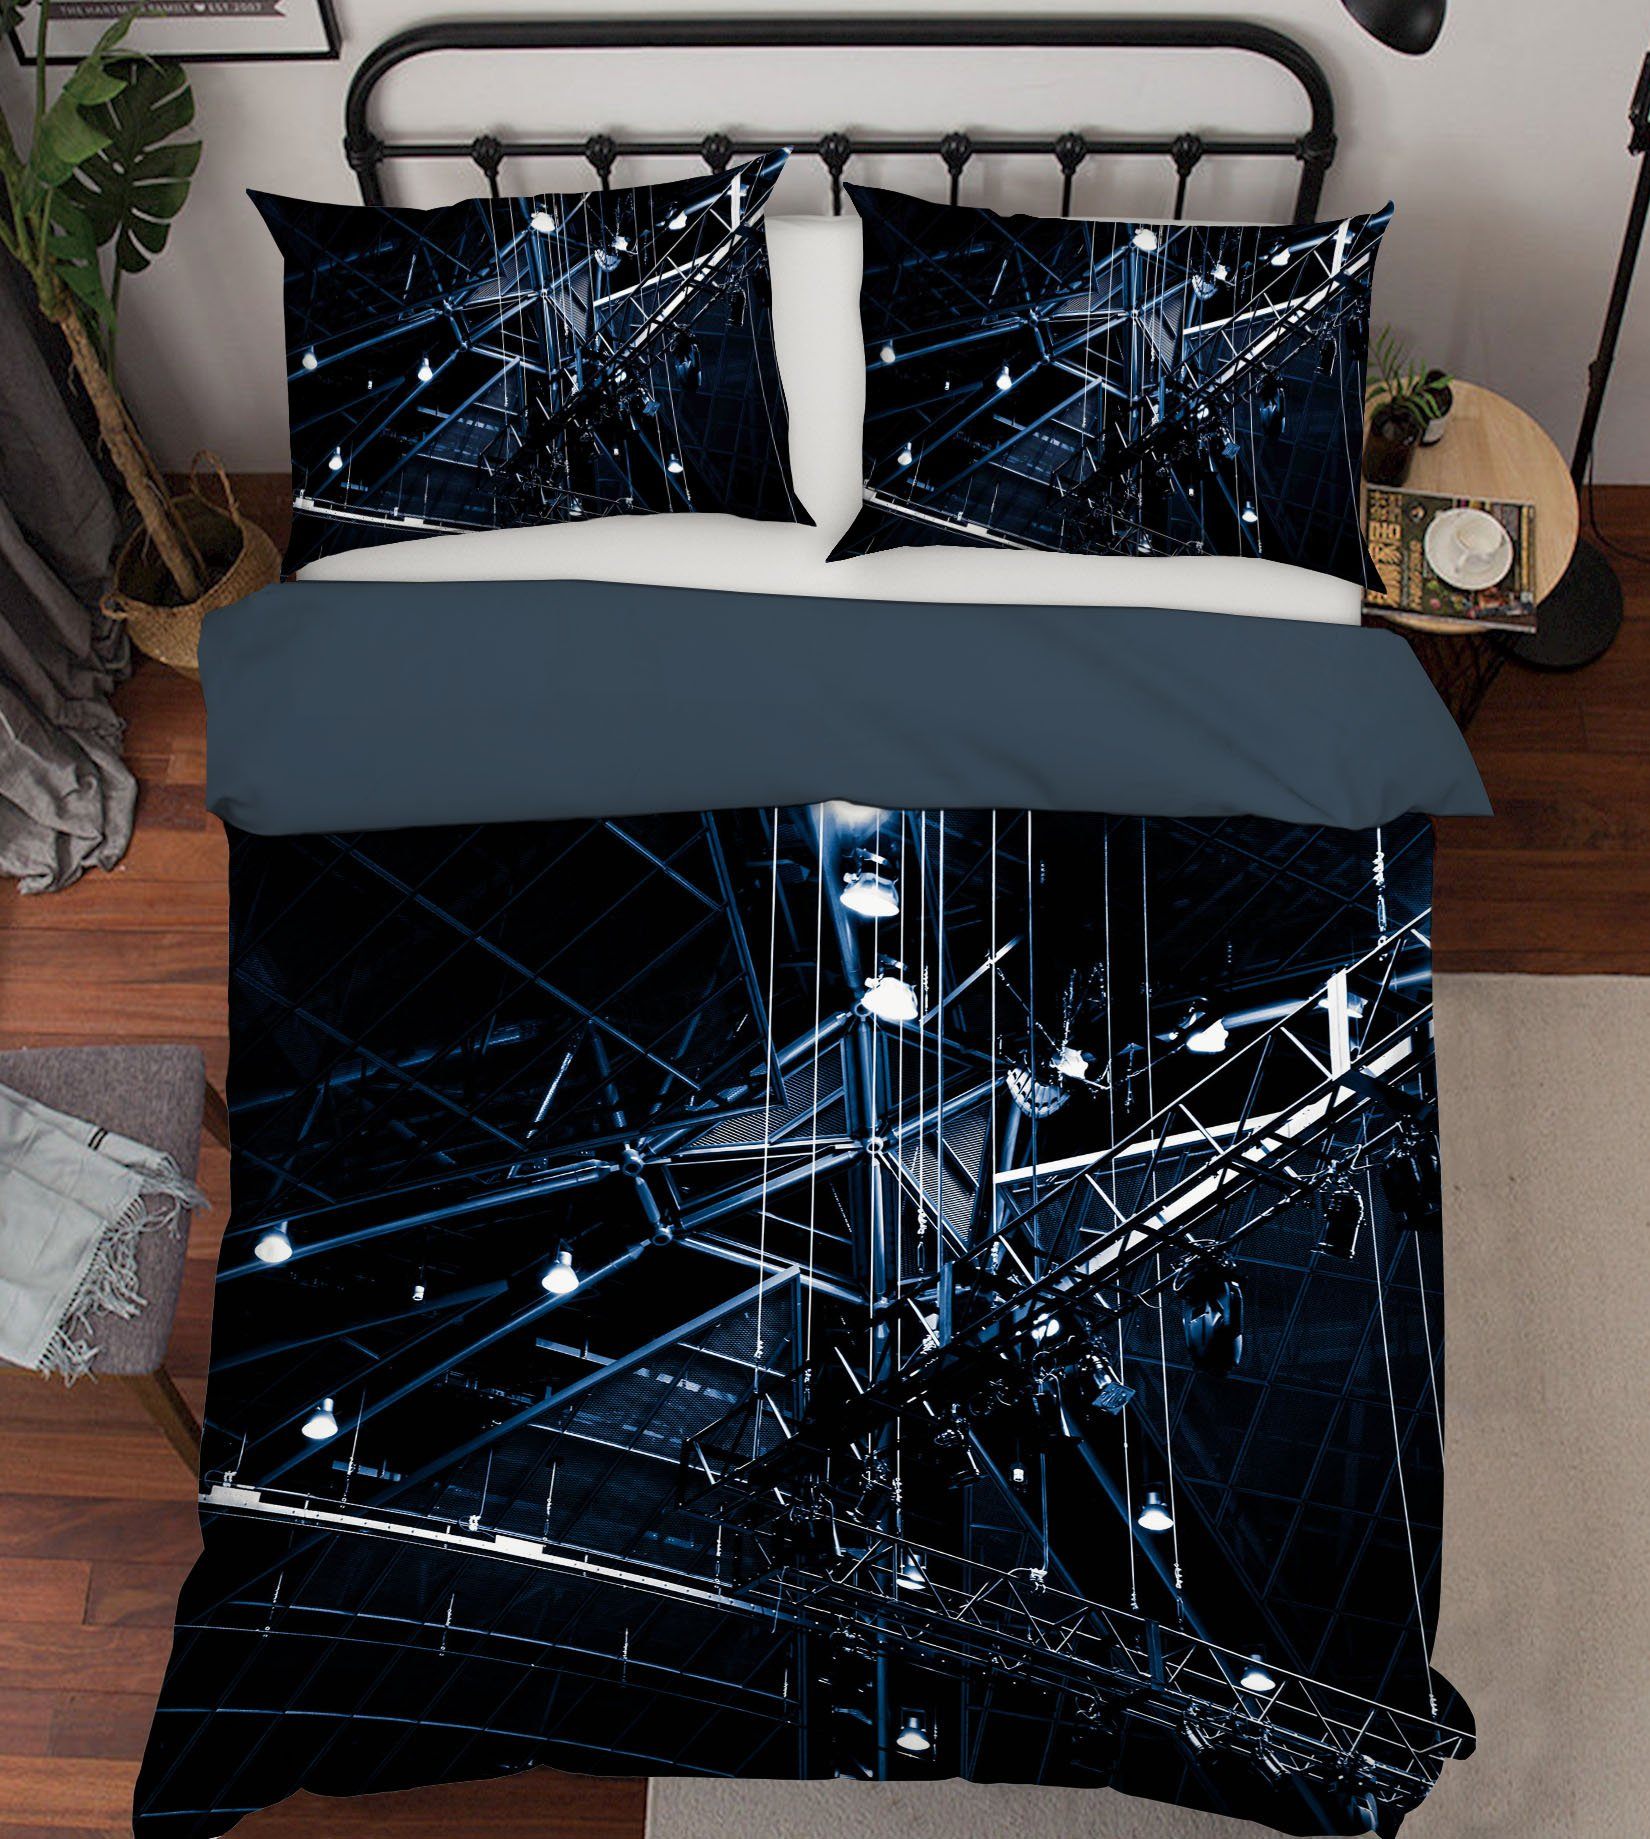 3D Bright Light 2001 Noirblanc777 Bedding Bed Pillowcases Quilt Quiet Covers AJ Creativity Home 